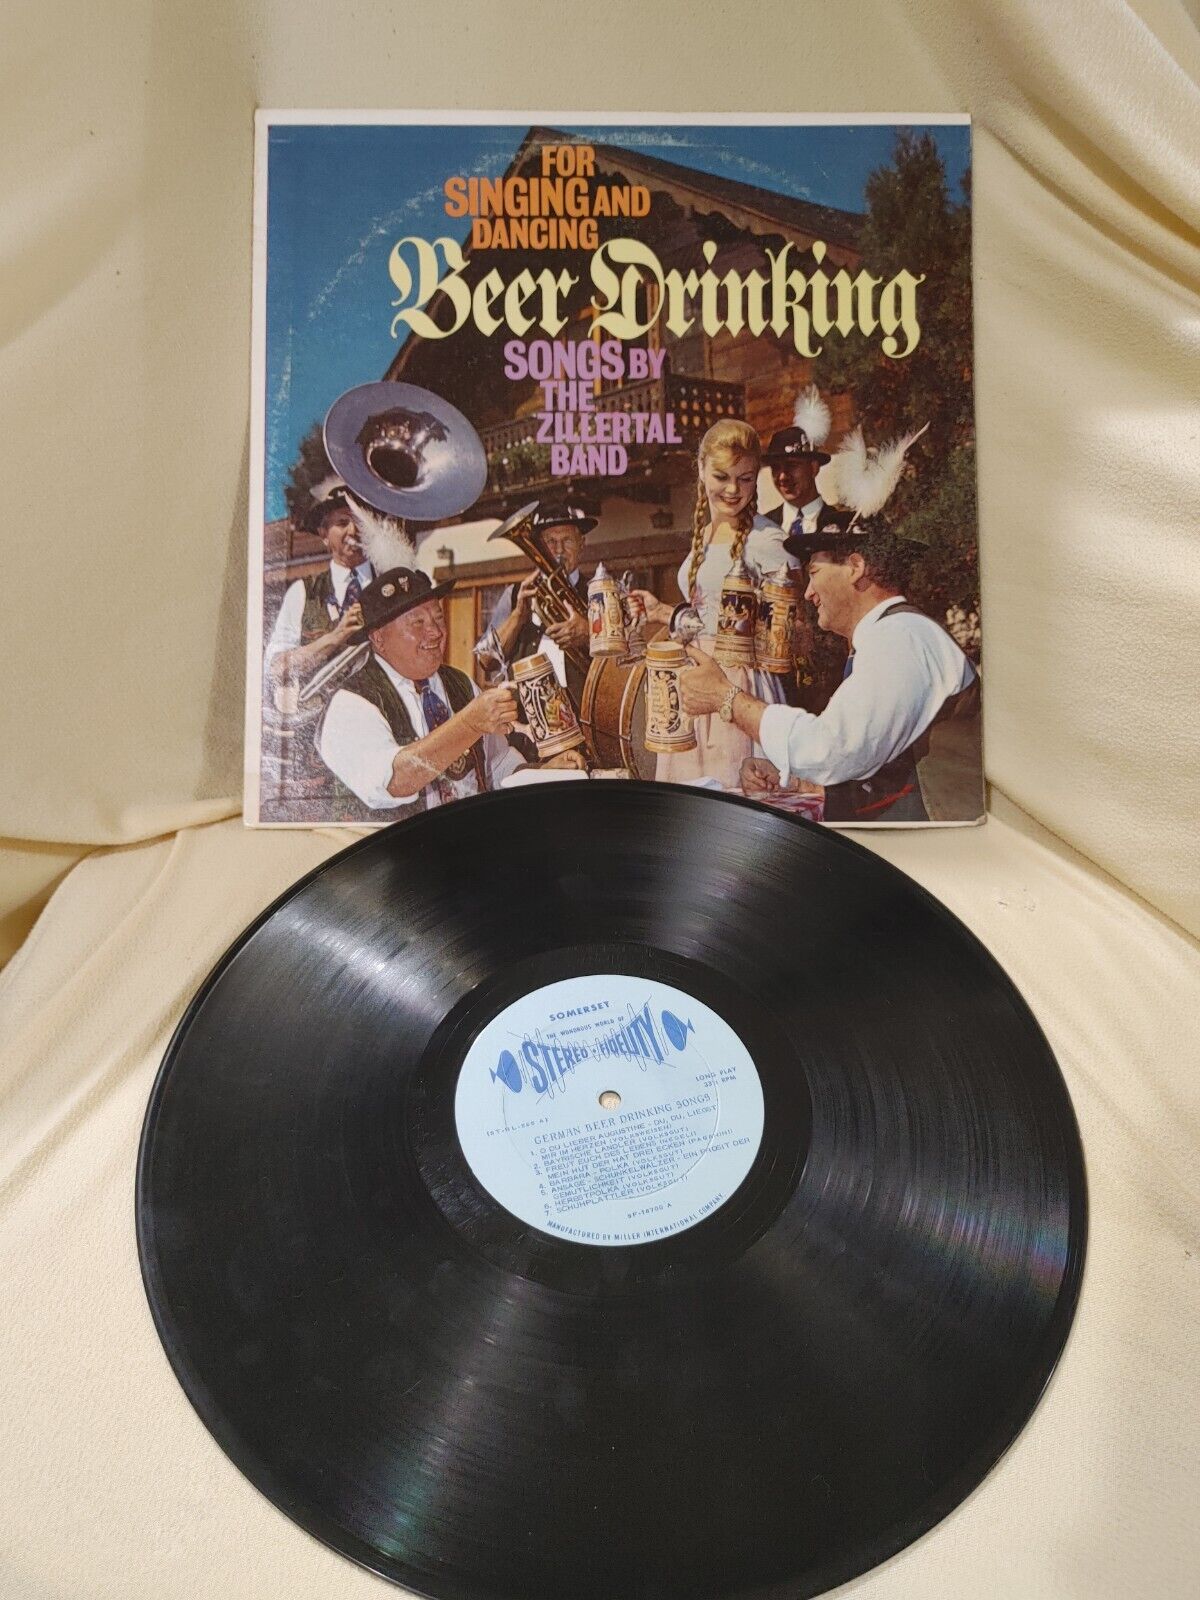 The Zillertal Band LP Record For Singing And Dancing, Beer Drinking Songs